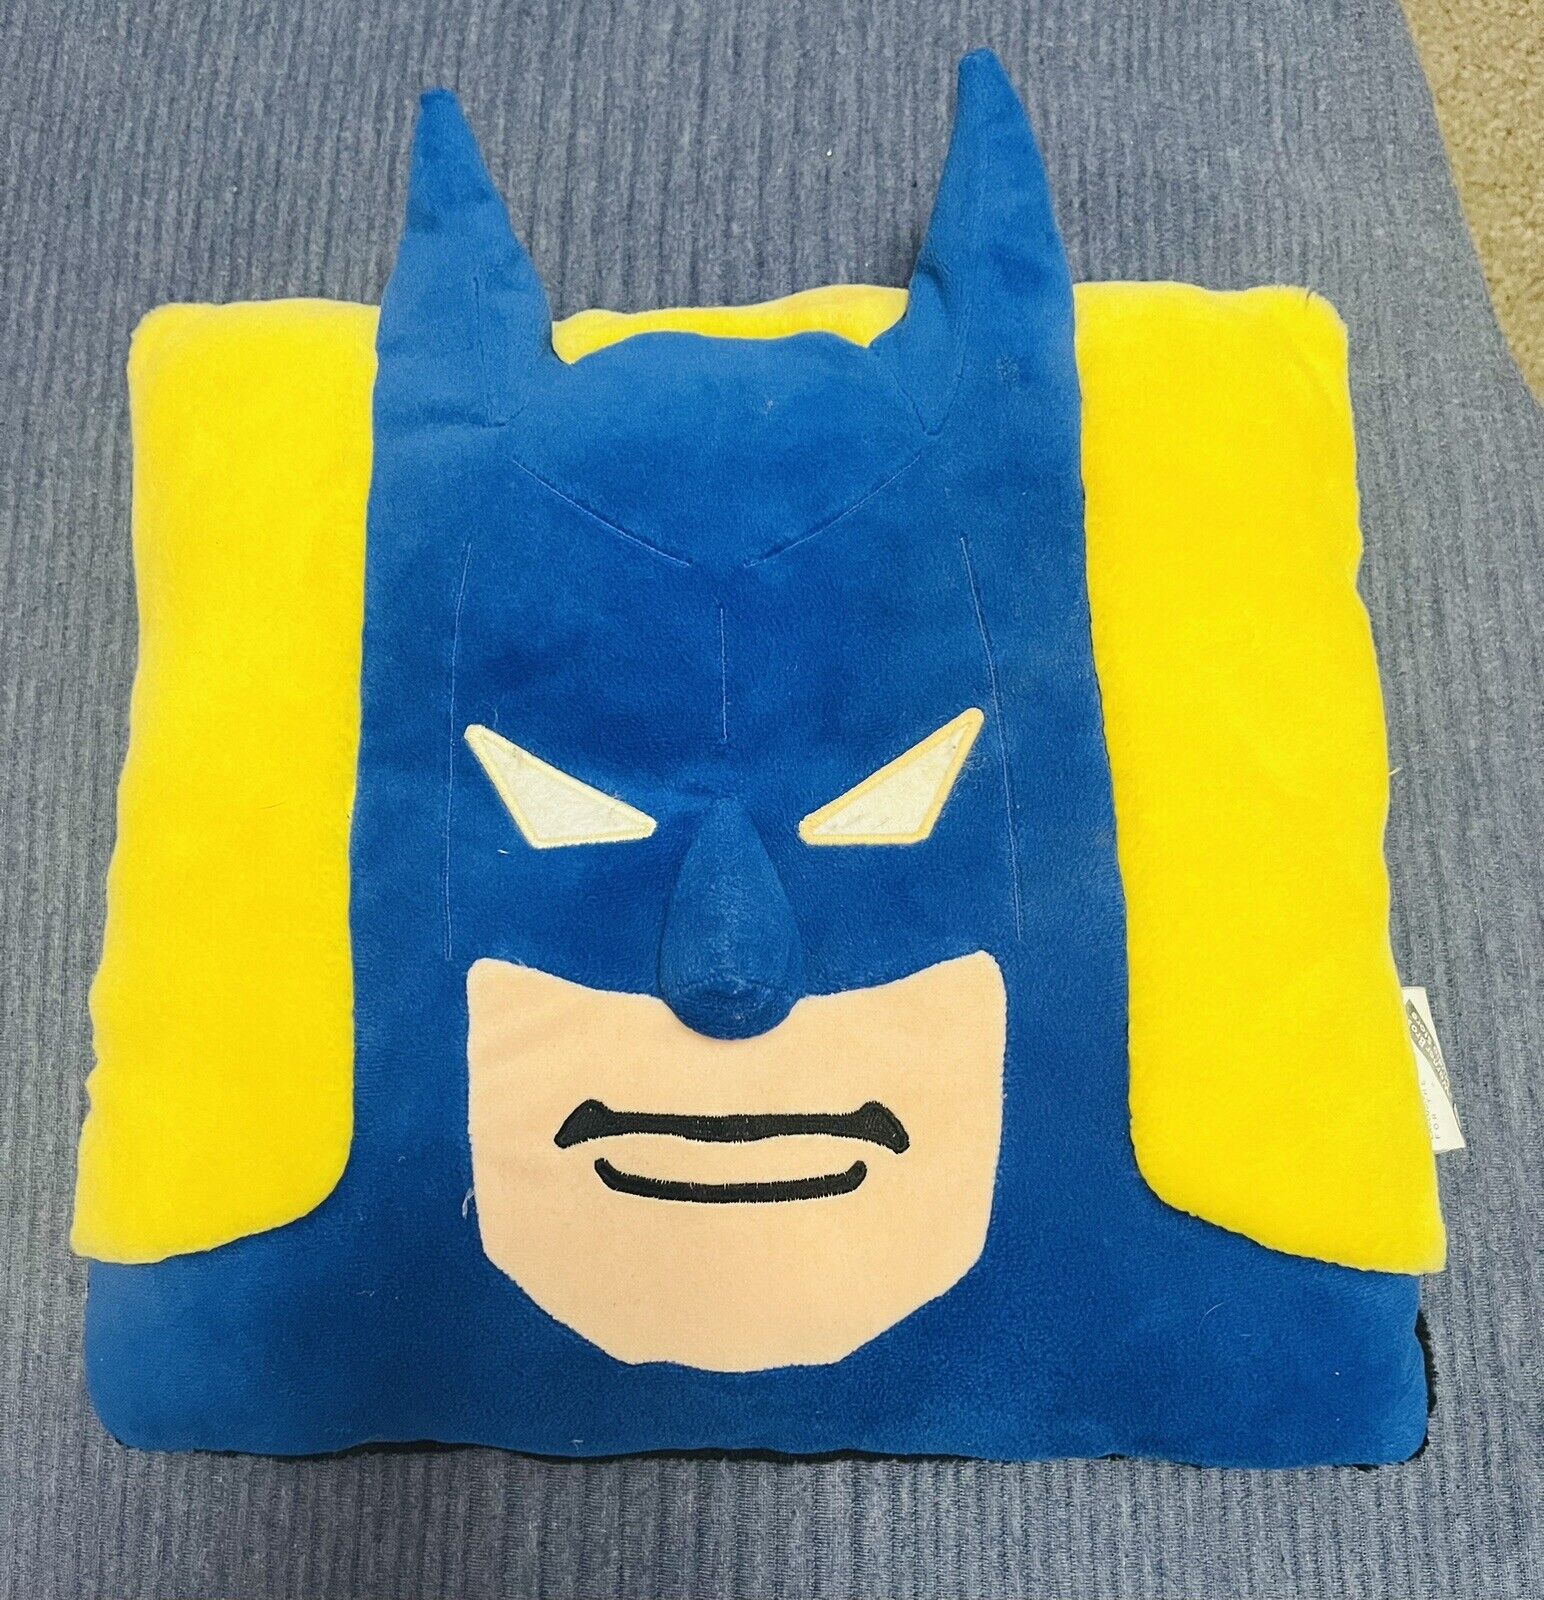 RARE Batman Pillow From Warner Bros. Studios Store. Only 2 Known To Exist